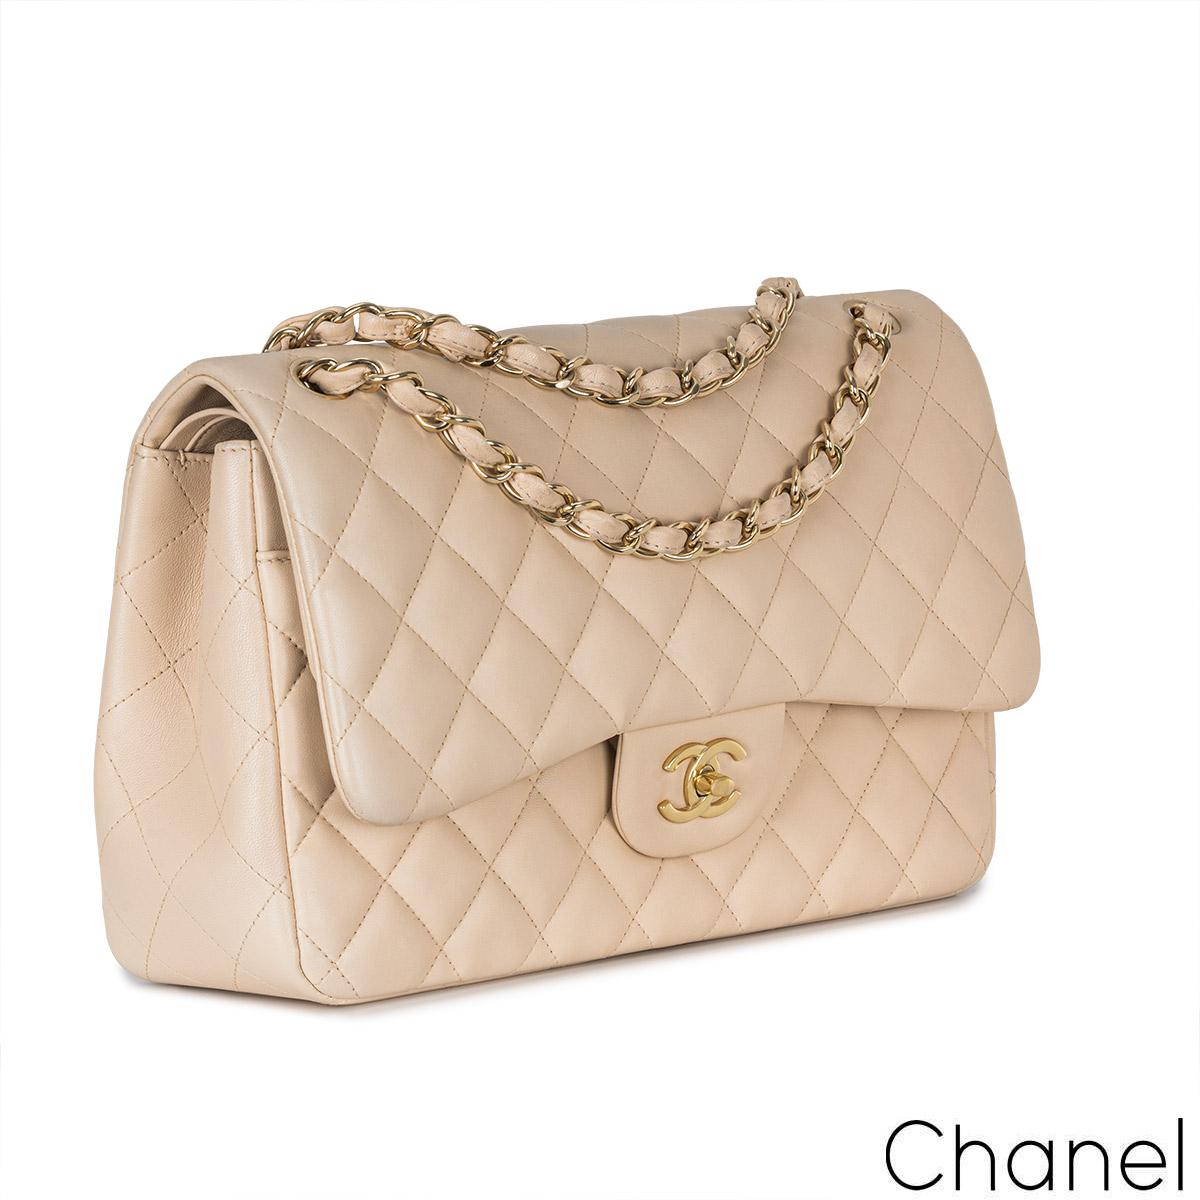 Chanel Beige Lambskin Jumbo Classic Double Flap Bag GHW In Excellent Condition For Sale In London, GB